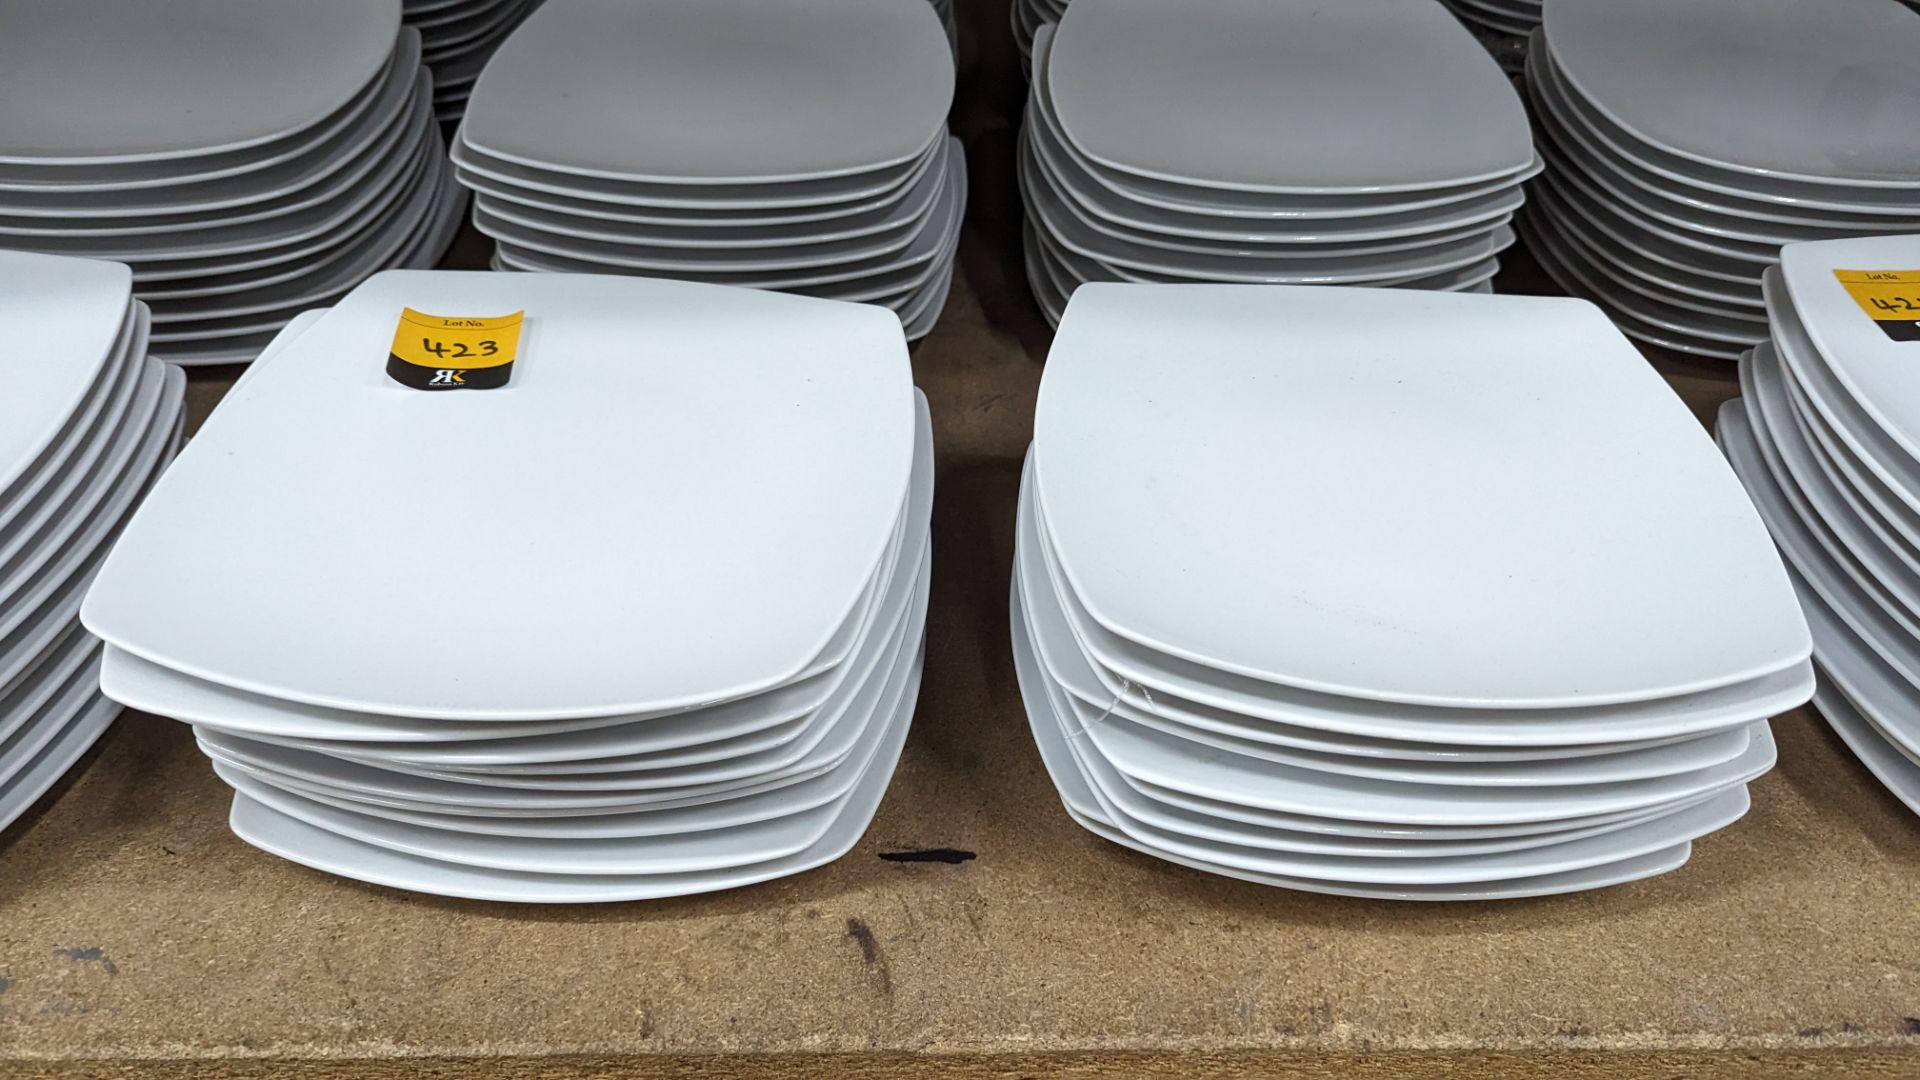 60 off white "squarish" plates with curved sides, each measuring approximately 255mm square - 6 stac - Image 3 of 6